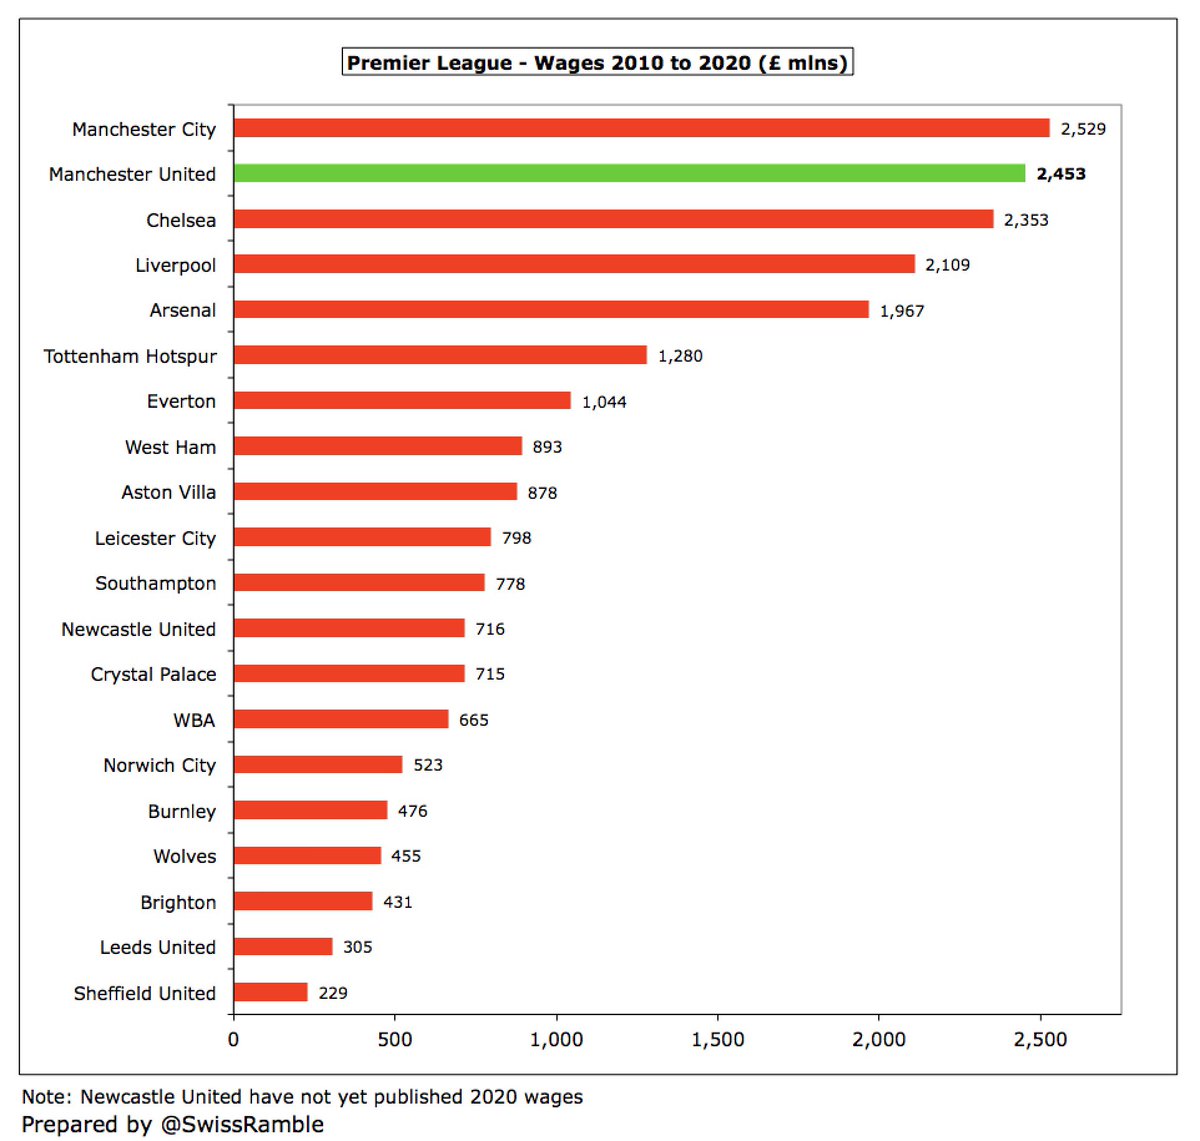 Despite having by far the highest revenue in this period,  #MUFC £2.4 bln wage bill since 2010 was less than  #MCFC £2.5 bln, though still ahead of  #CFC £2.3 bln,  #LFC £2.1 bln  #AFC £2.0 bln and  #THFC £1.3 bln. On this basis, the team should have performed better on the pitch.